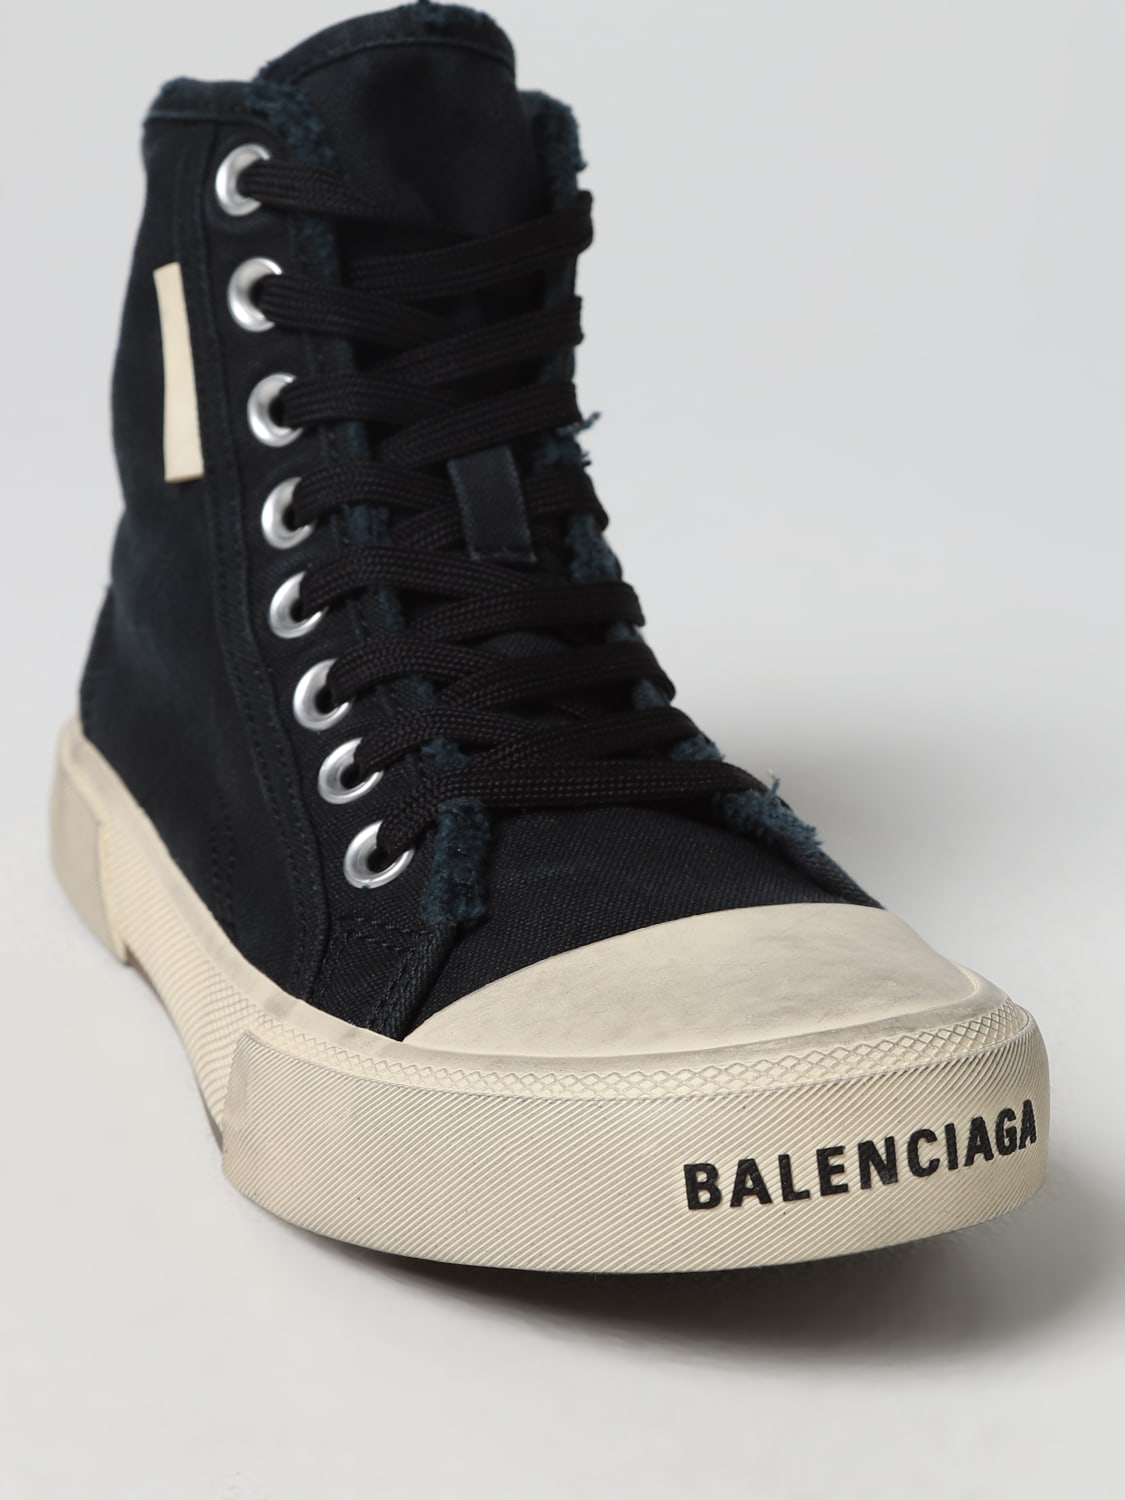 Paris sneakers in canvas - Black | Balenciaga sneakers 688756W3RC1 online at